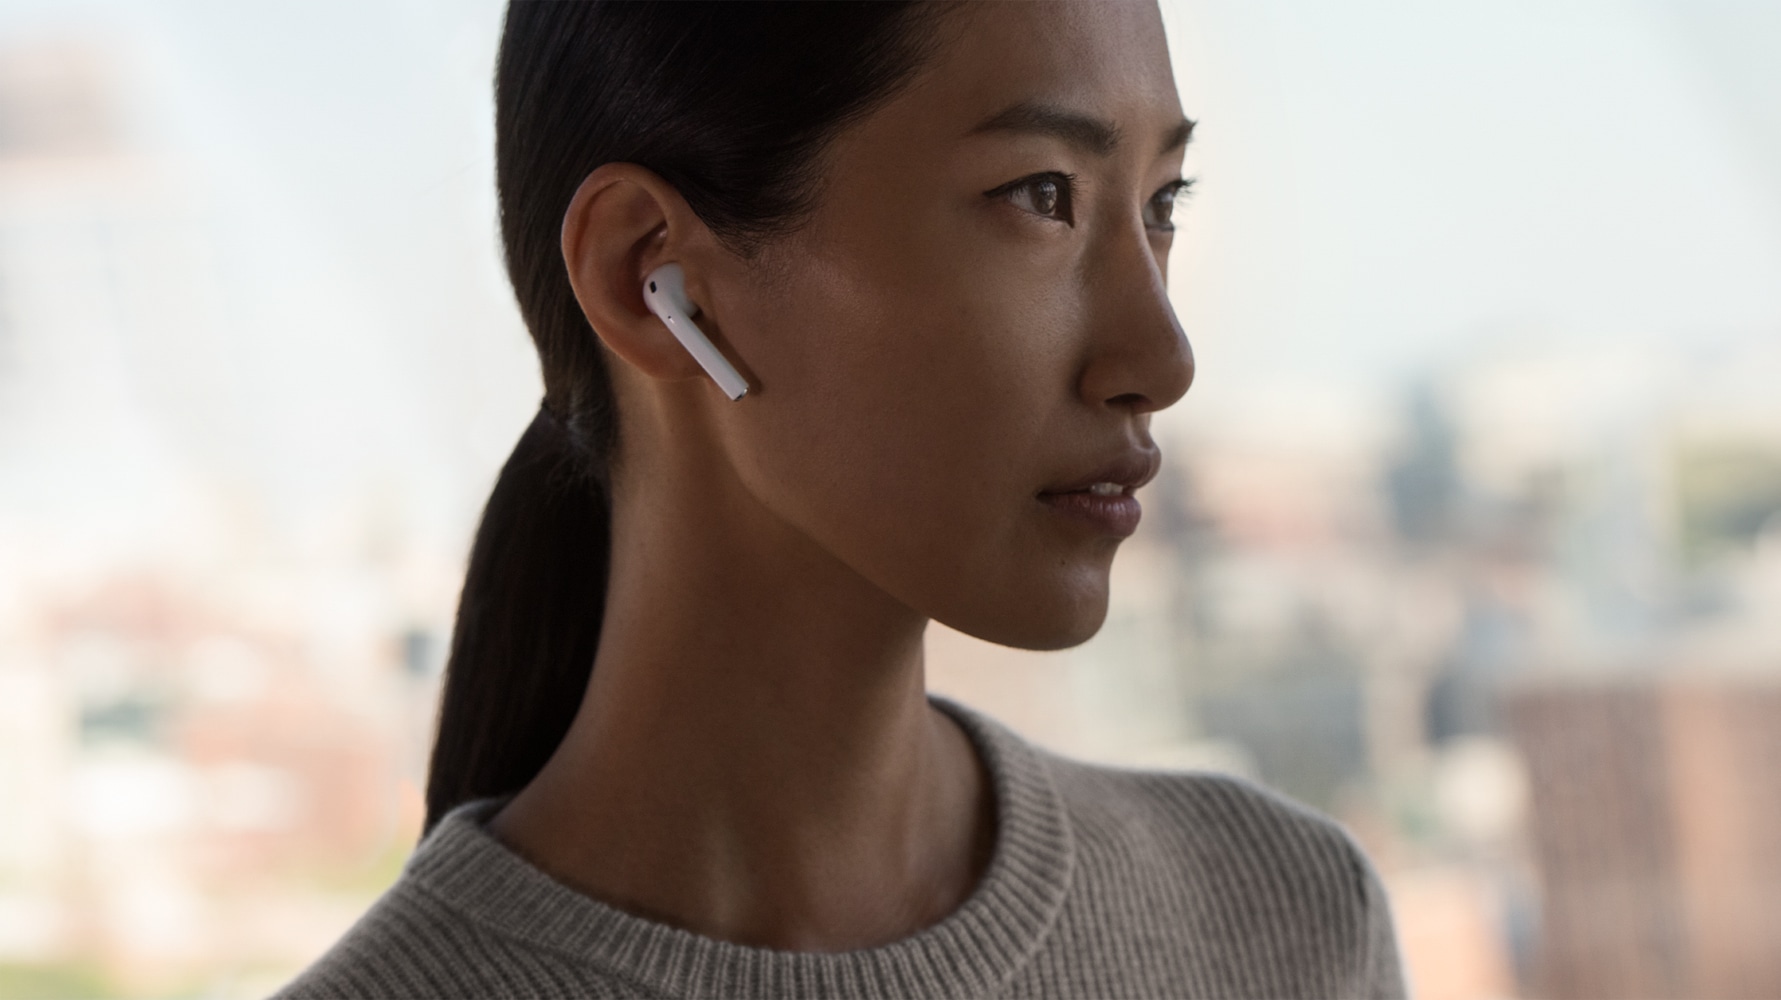 Apple sold more AirPods than iPhones in its first two years